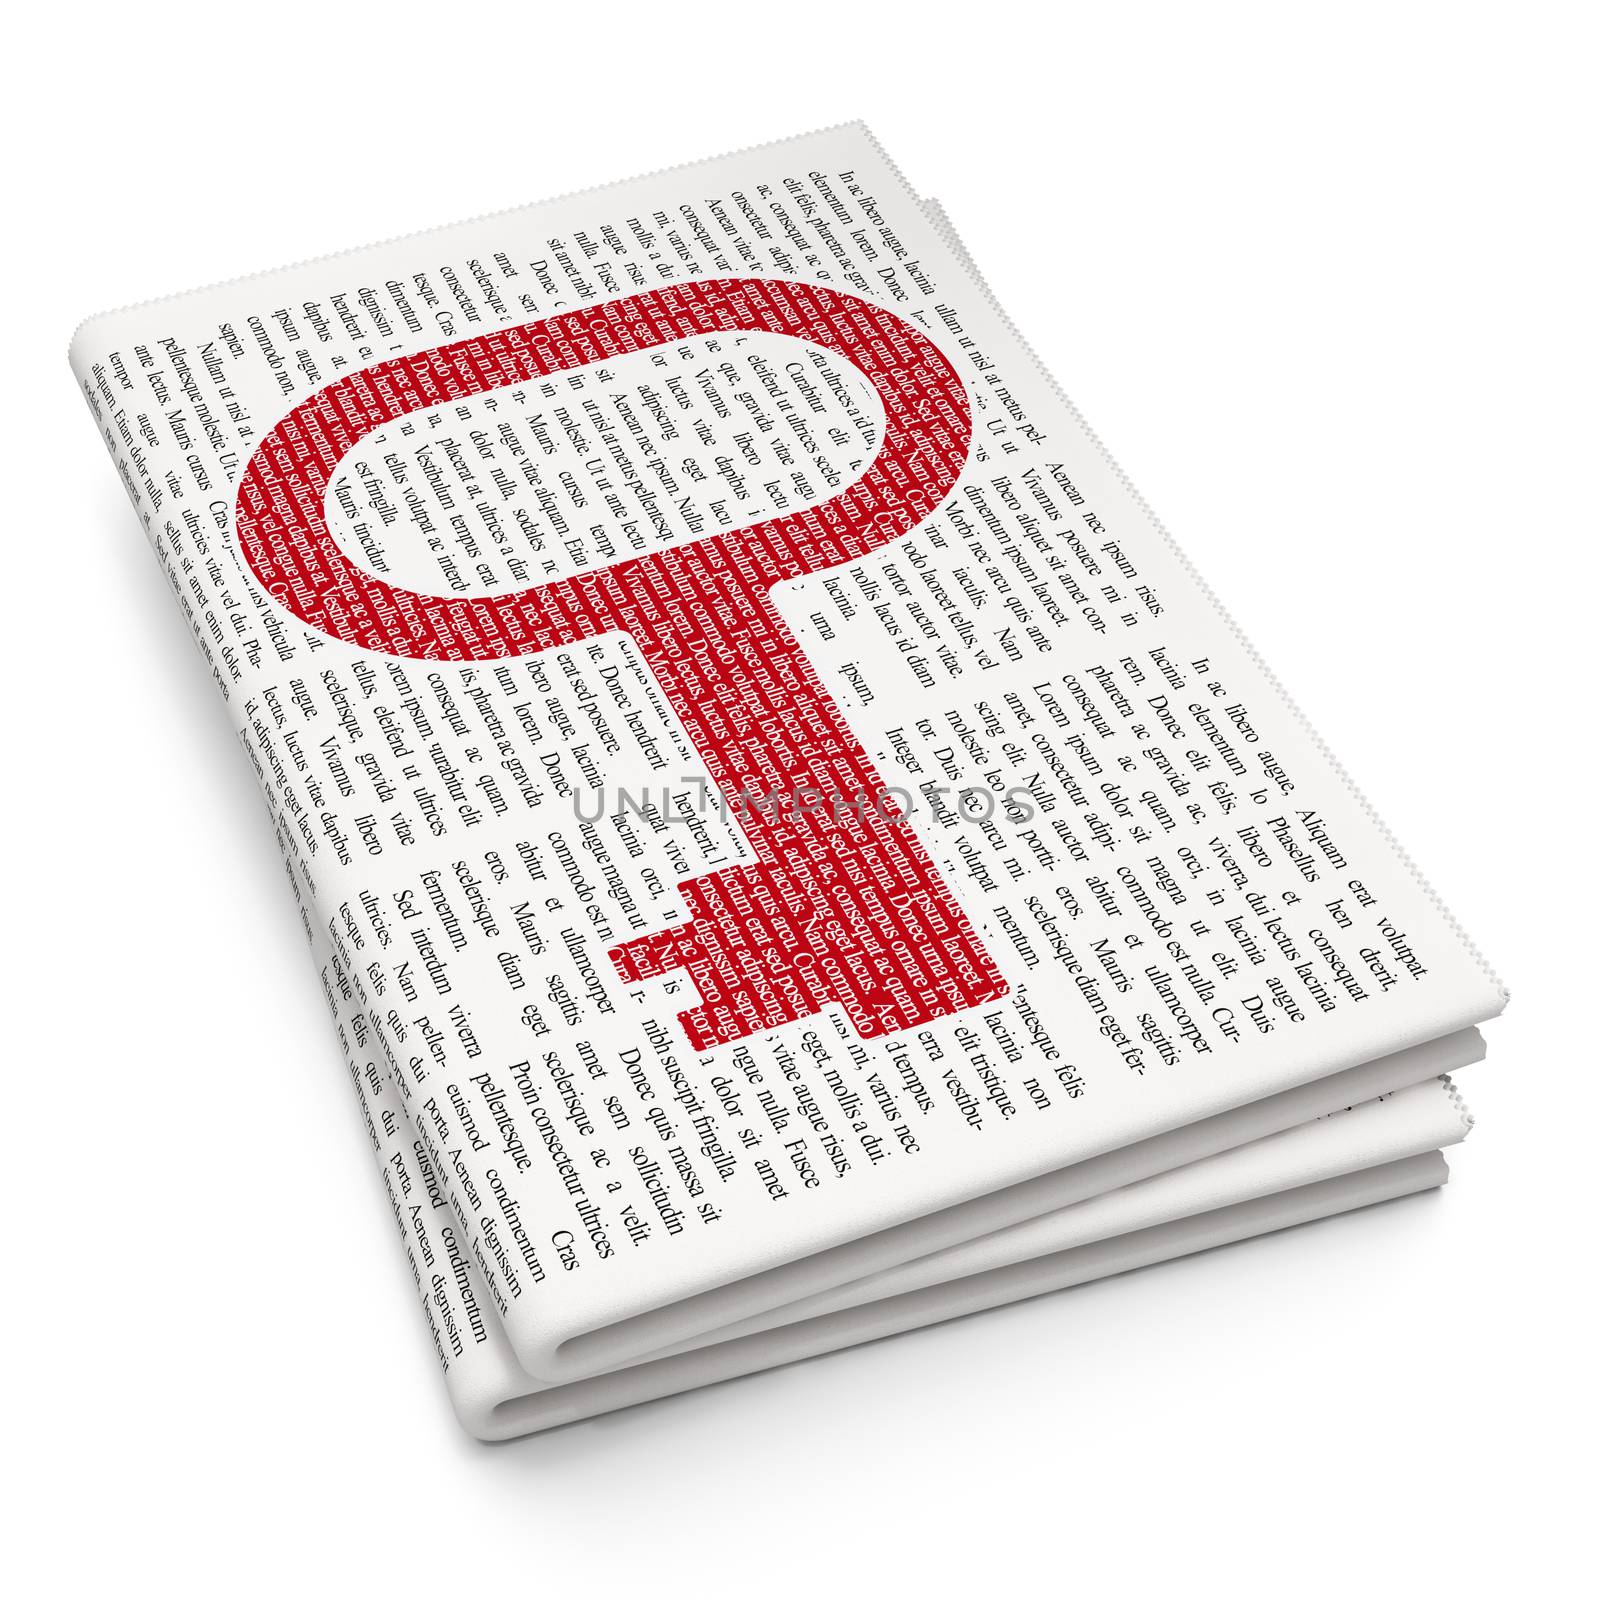 Privacy concept: Pixelated red Key icon on Newspaper background